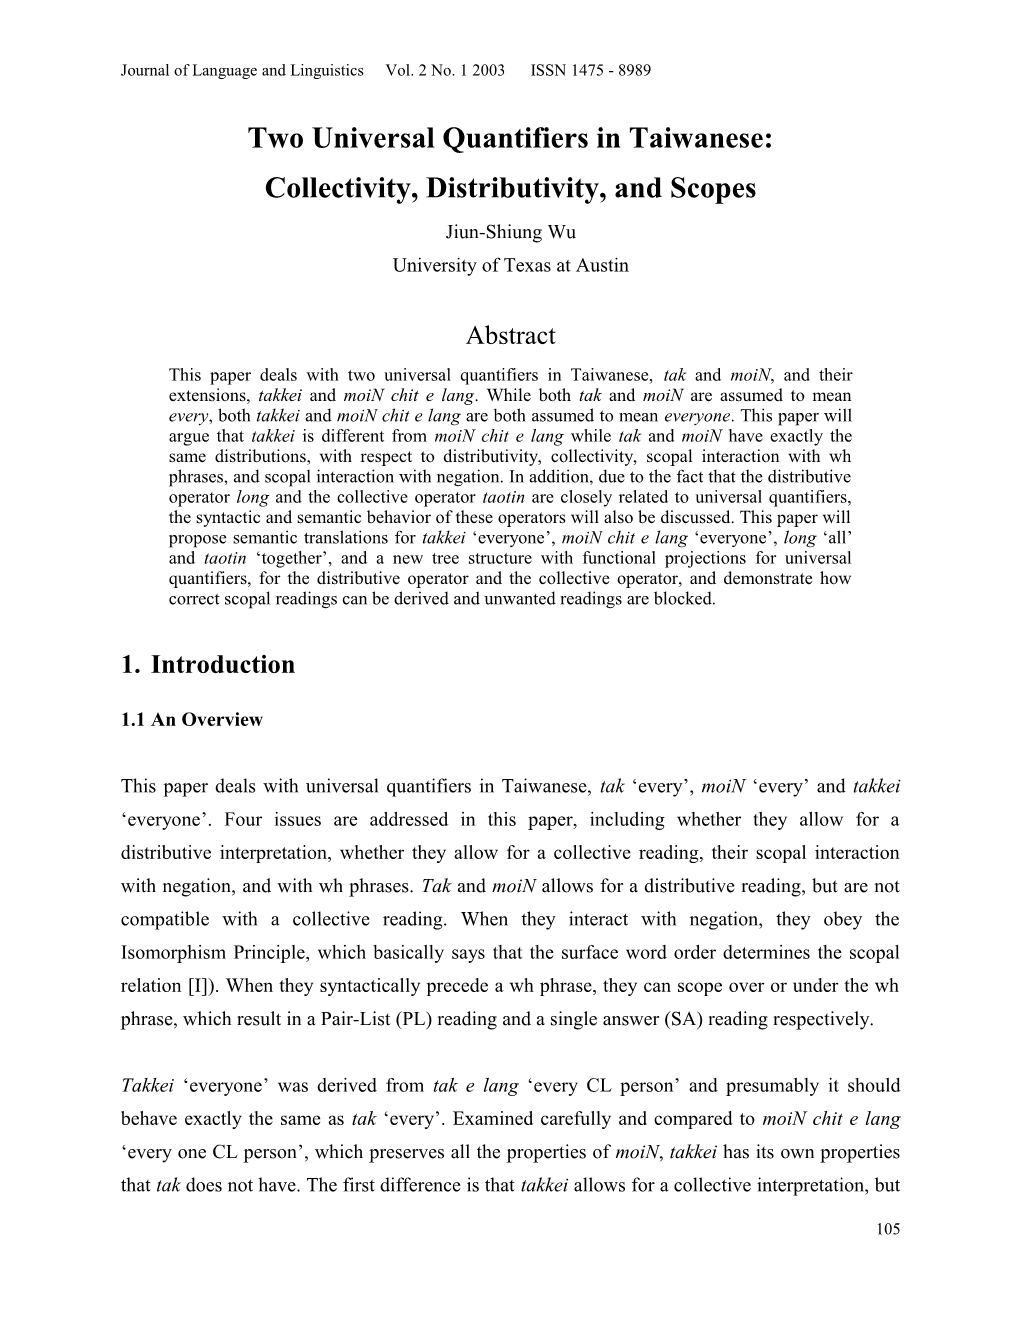 Title: Two Universal Quantifiers in Taiwanese: Collectivity, Distributivity, and Scopes